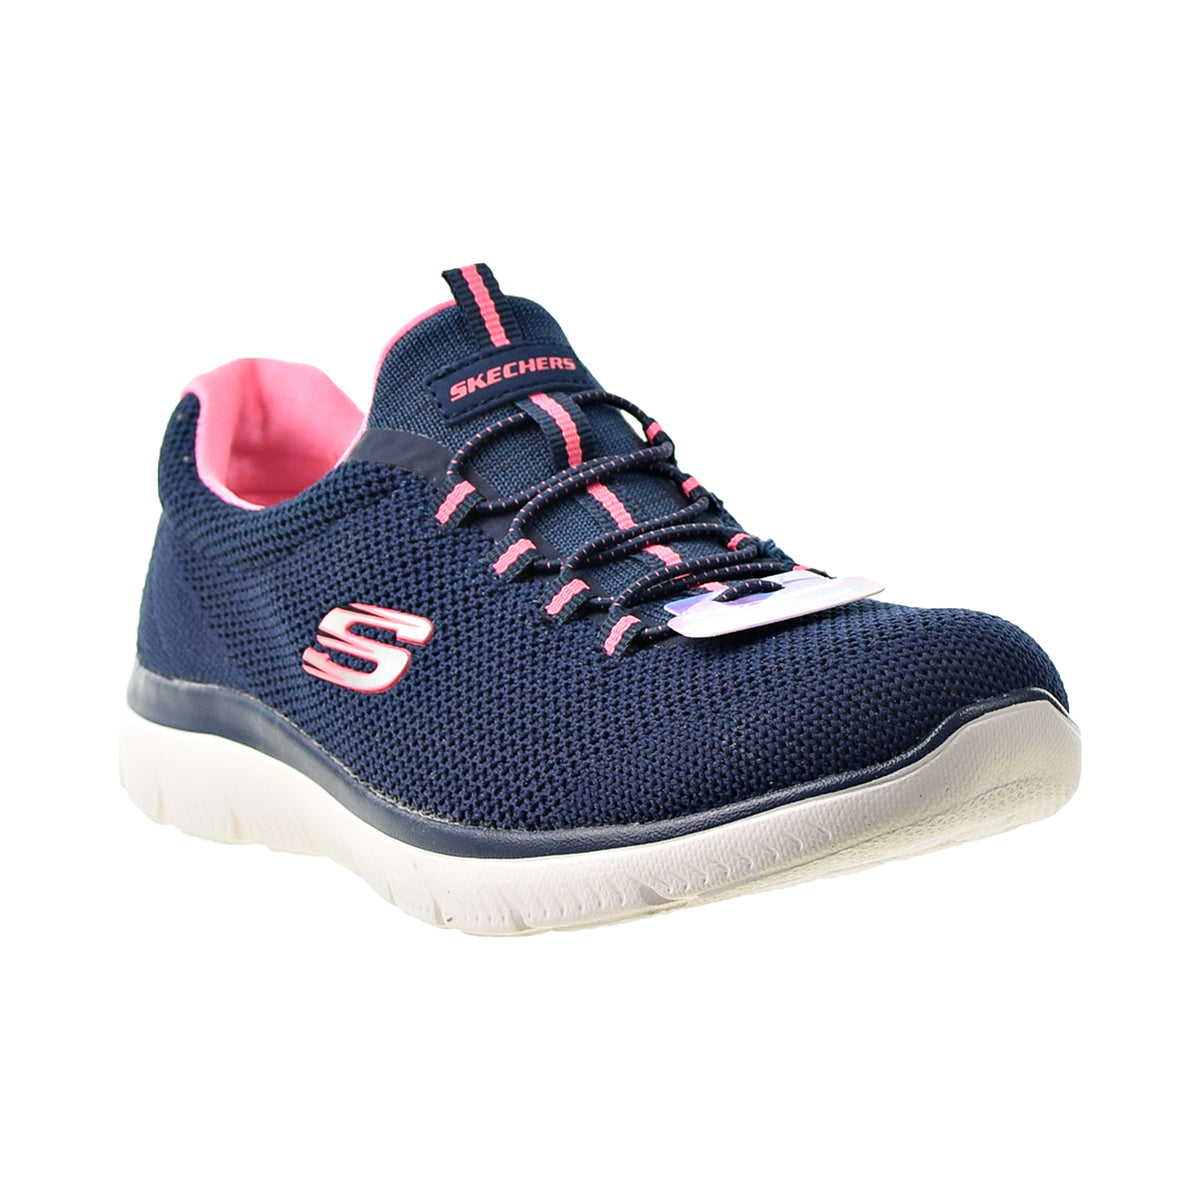 Skechers Summits Cool Women's Shoes Navy-Pink